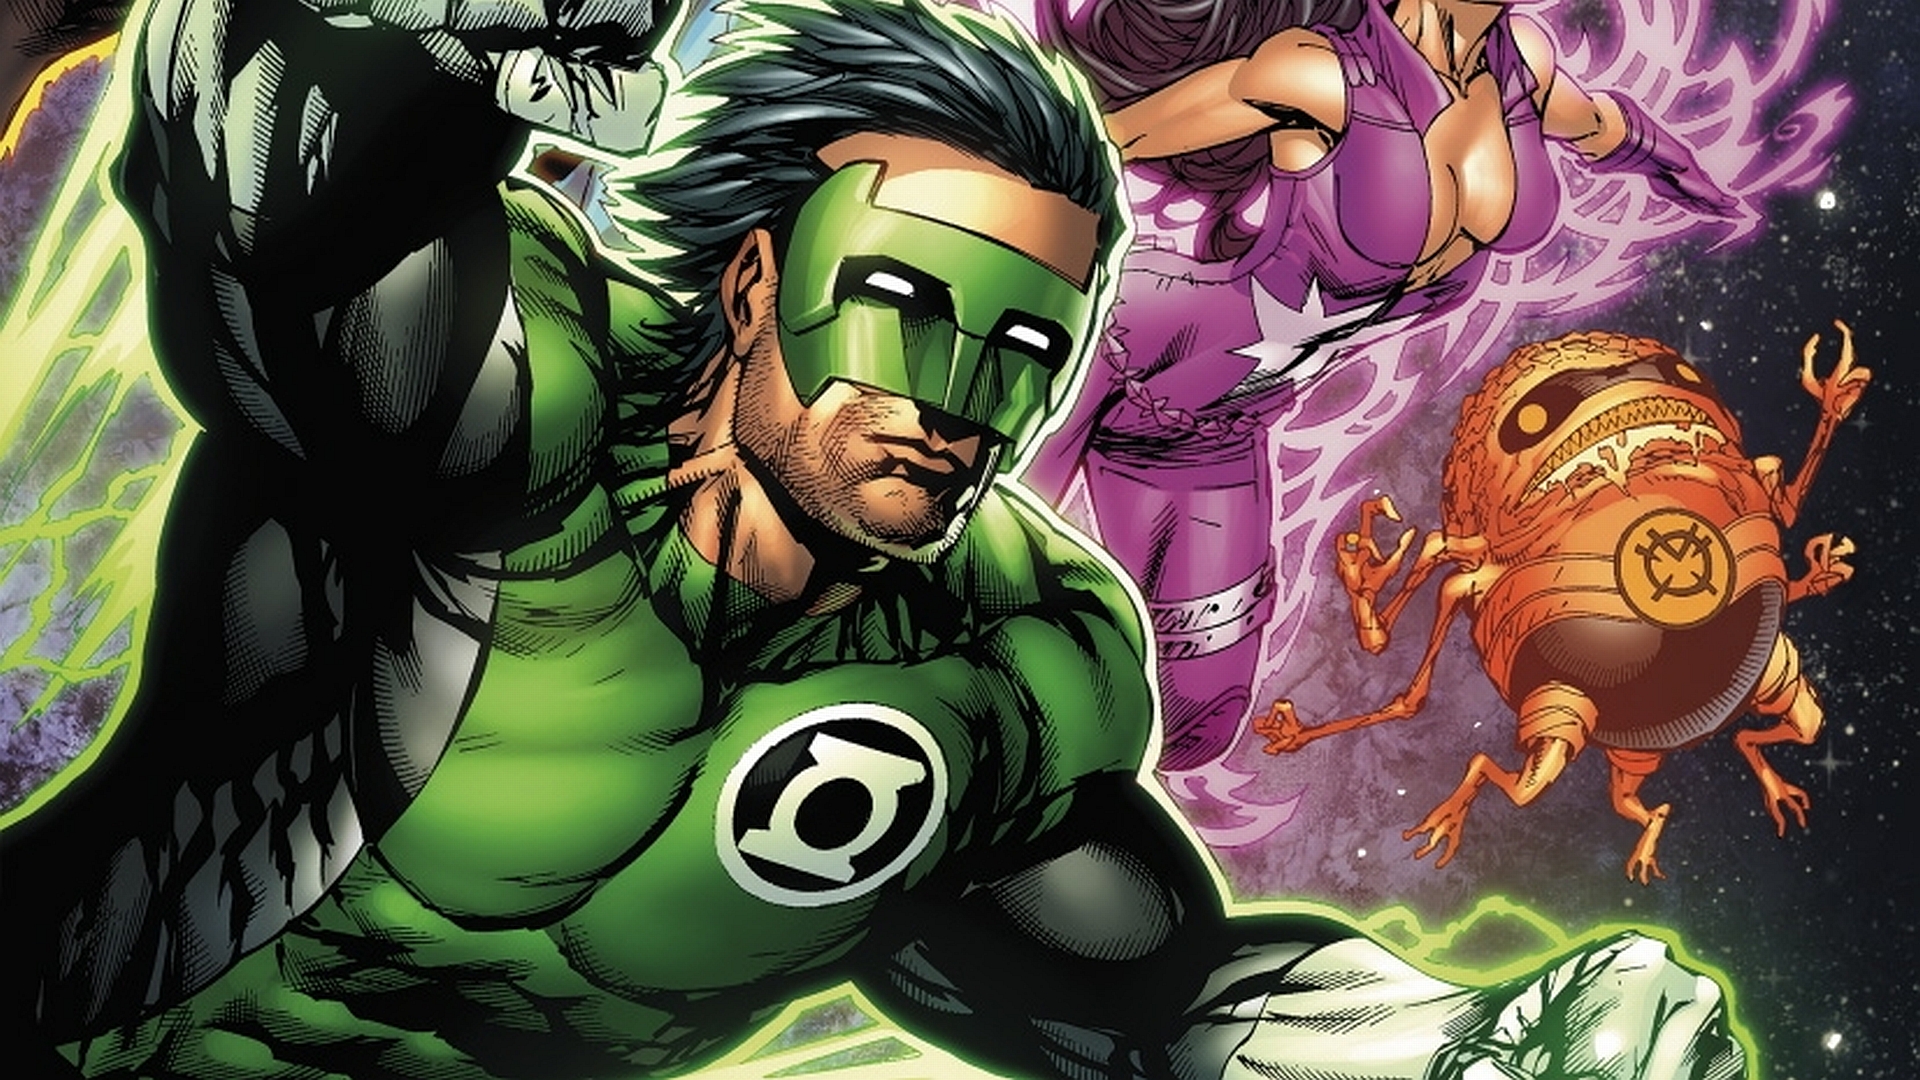 Green Lantern comic character in action against a vibrant backdrop.